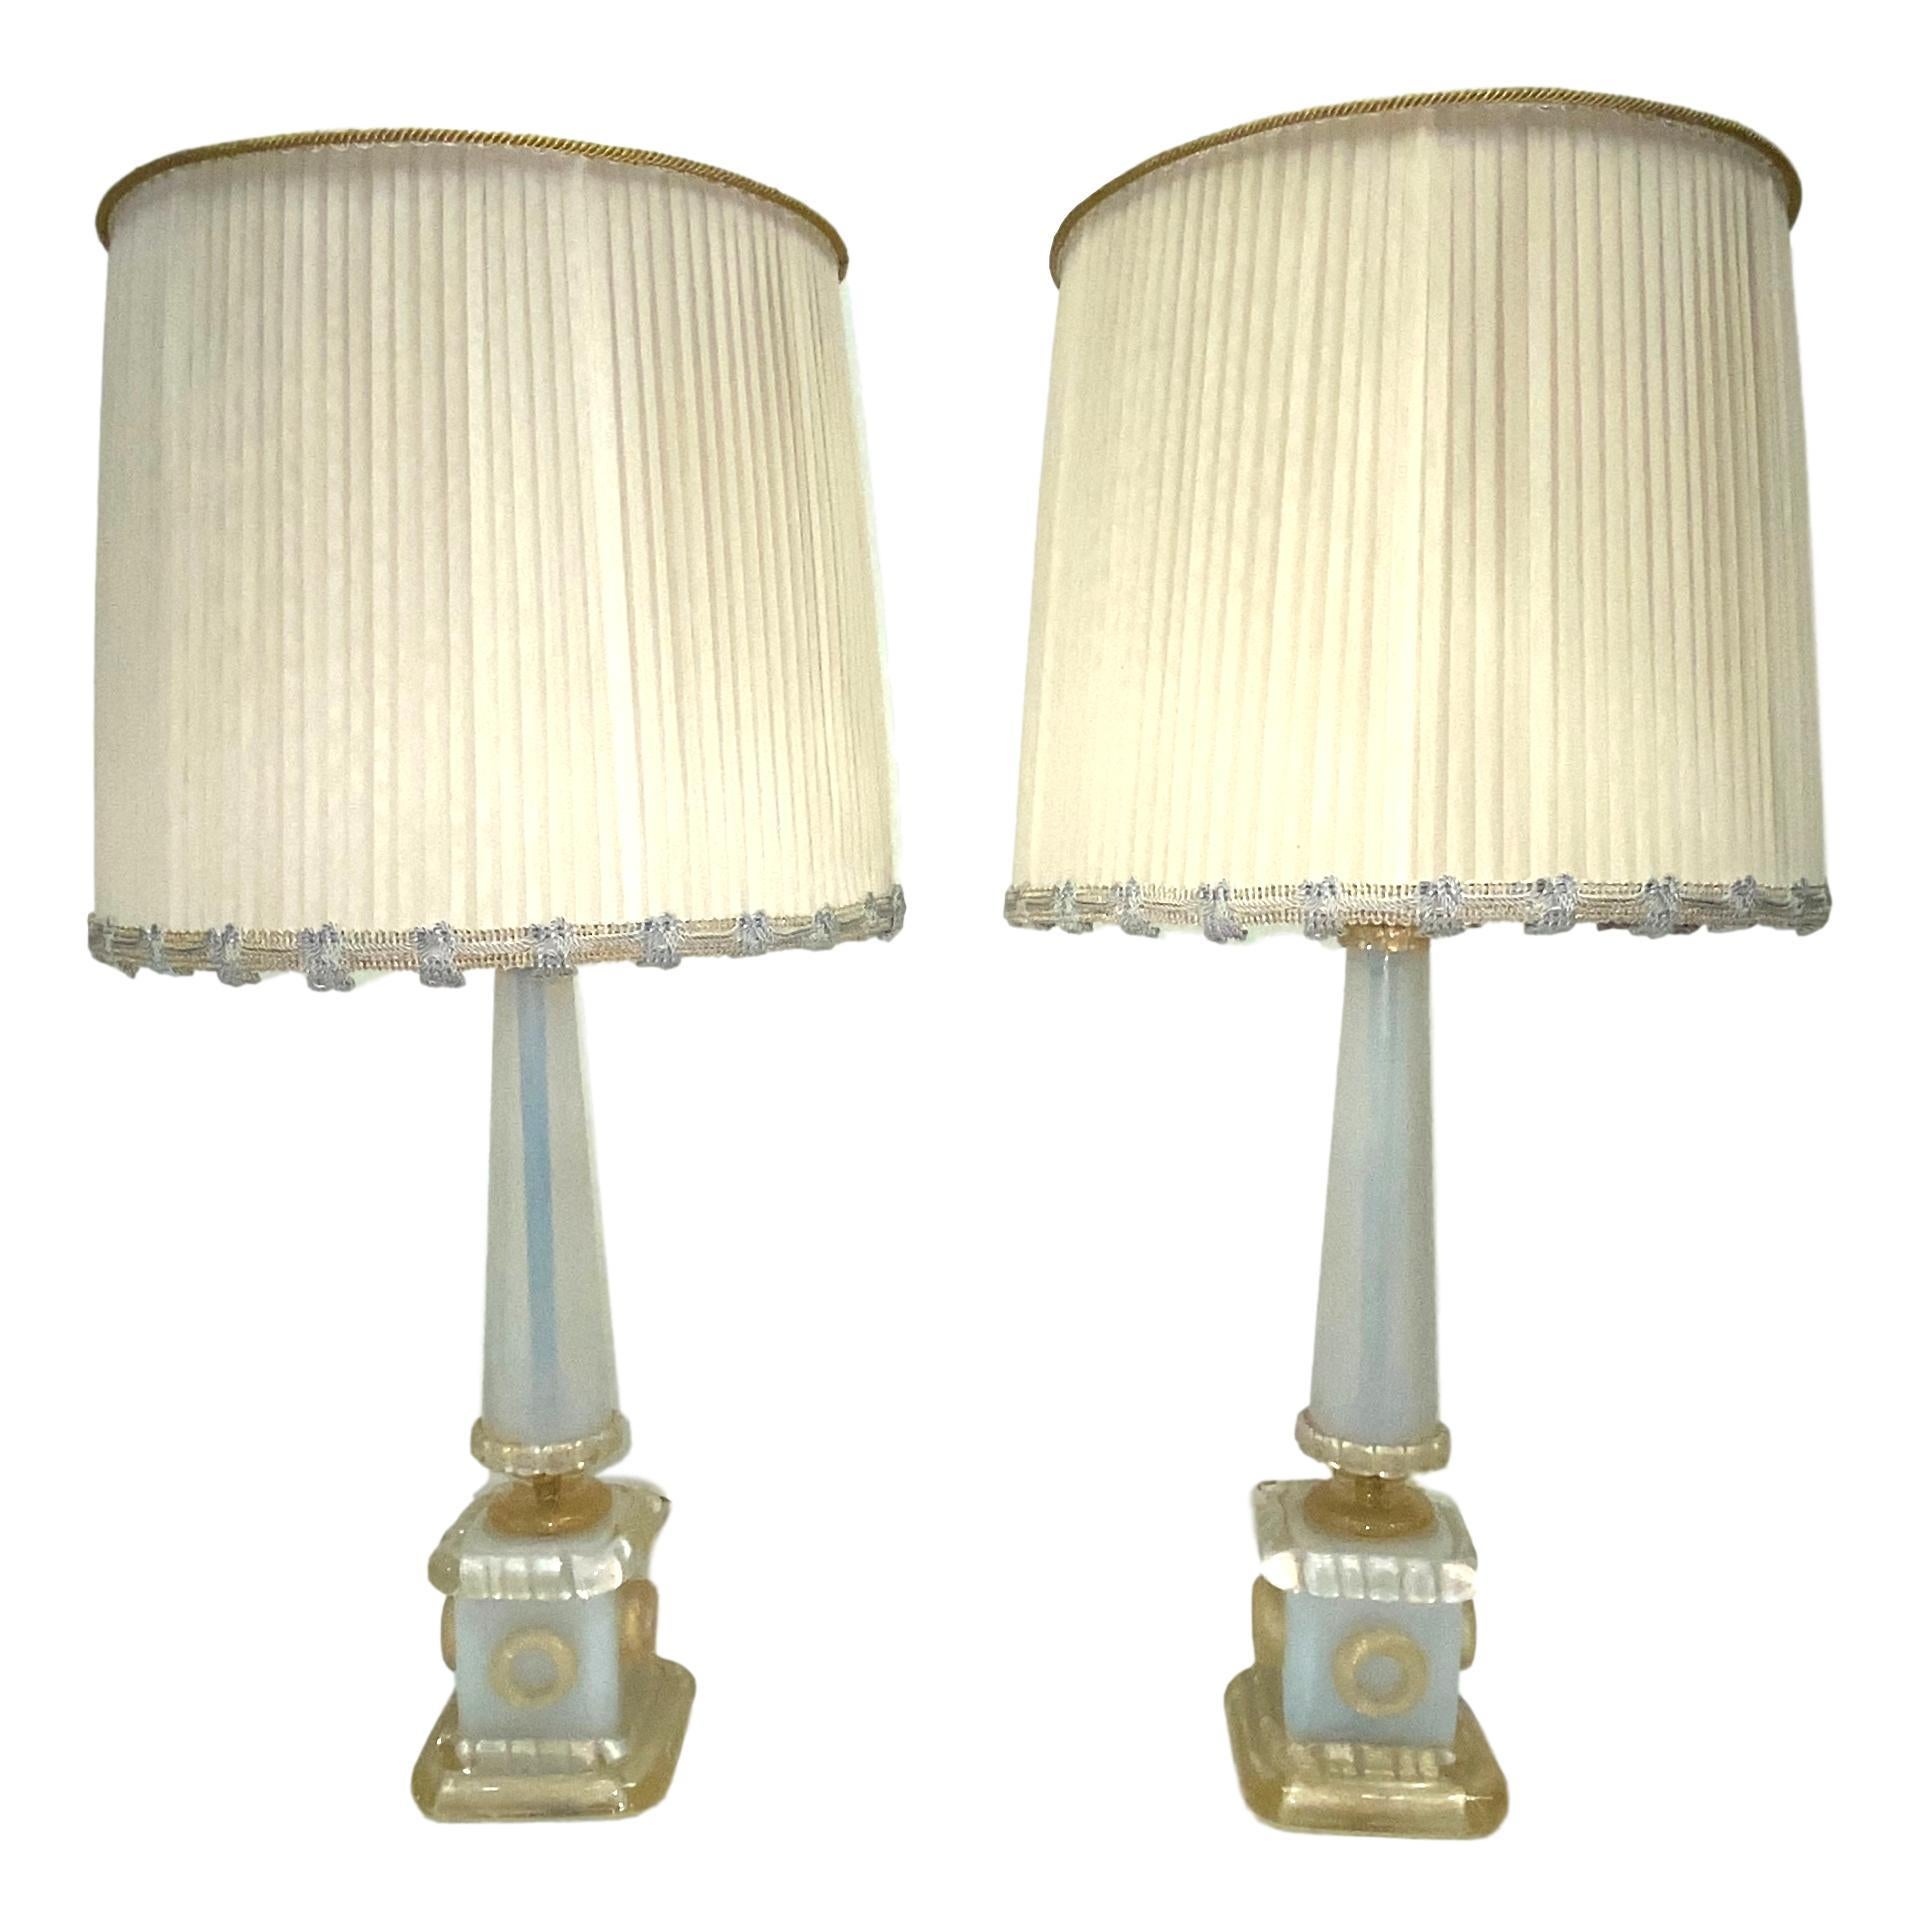 Neoclassical Barovier Toso Neoclassic Obelisk Iridize & Gold Infused Murano Glass Table Lamps For Sale